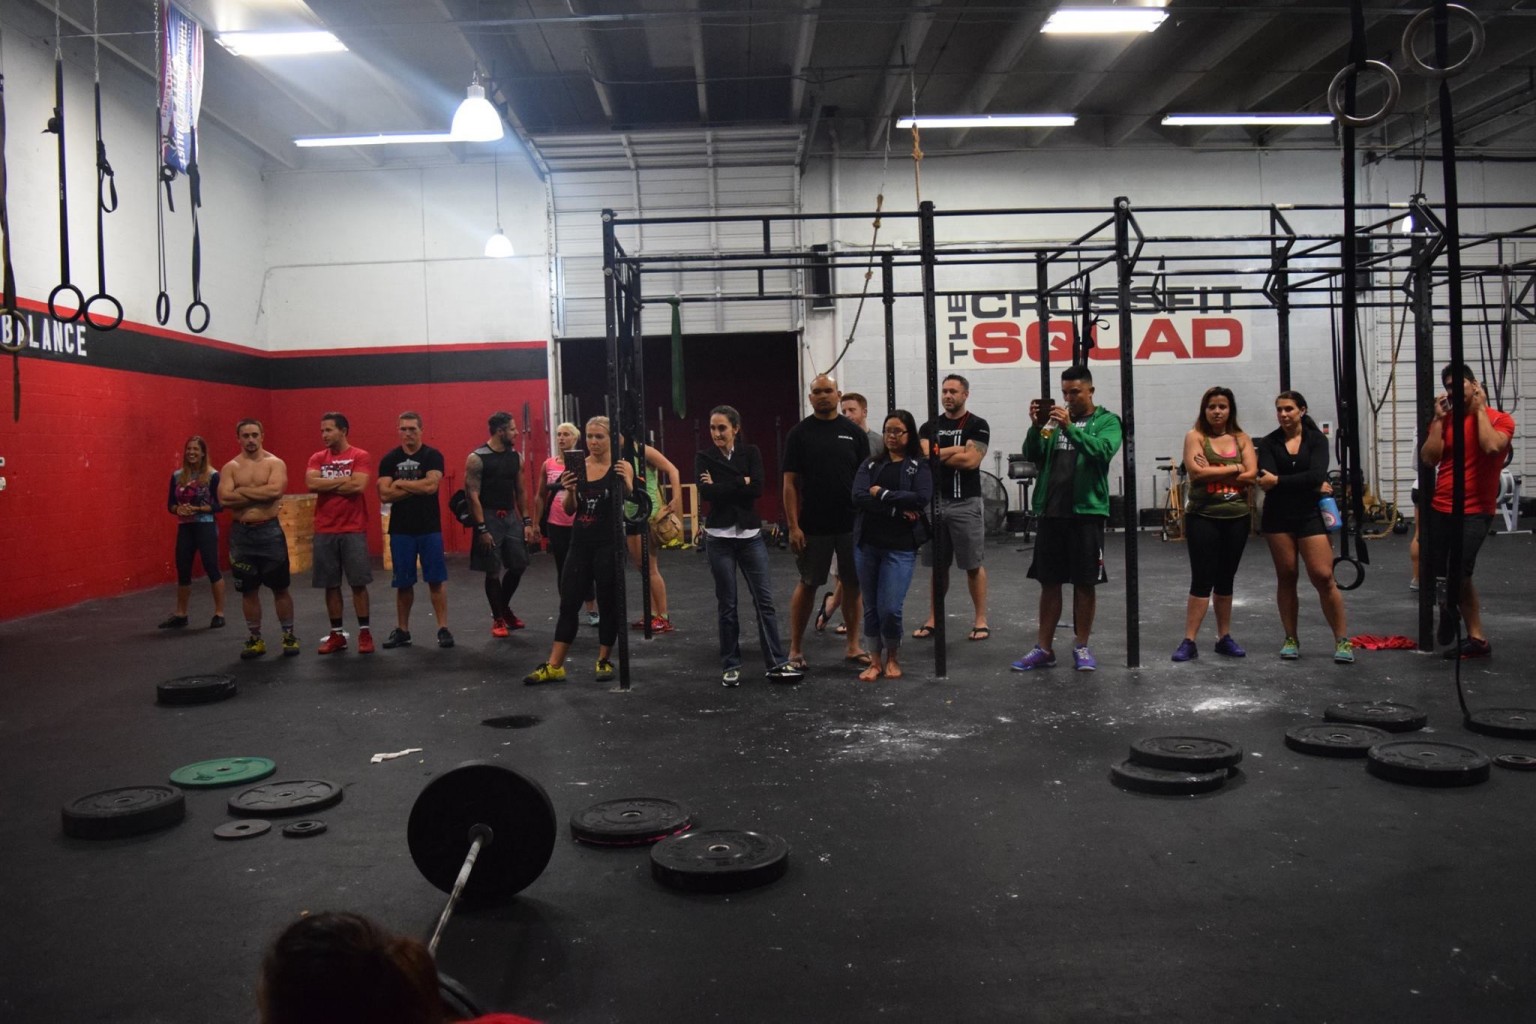 Started the Crossfit Open Last Friday